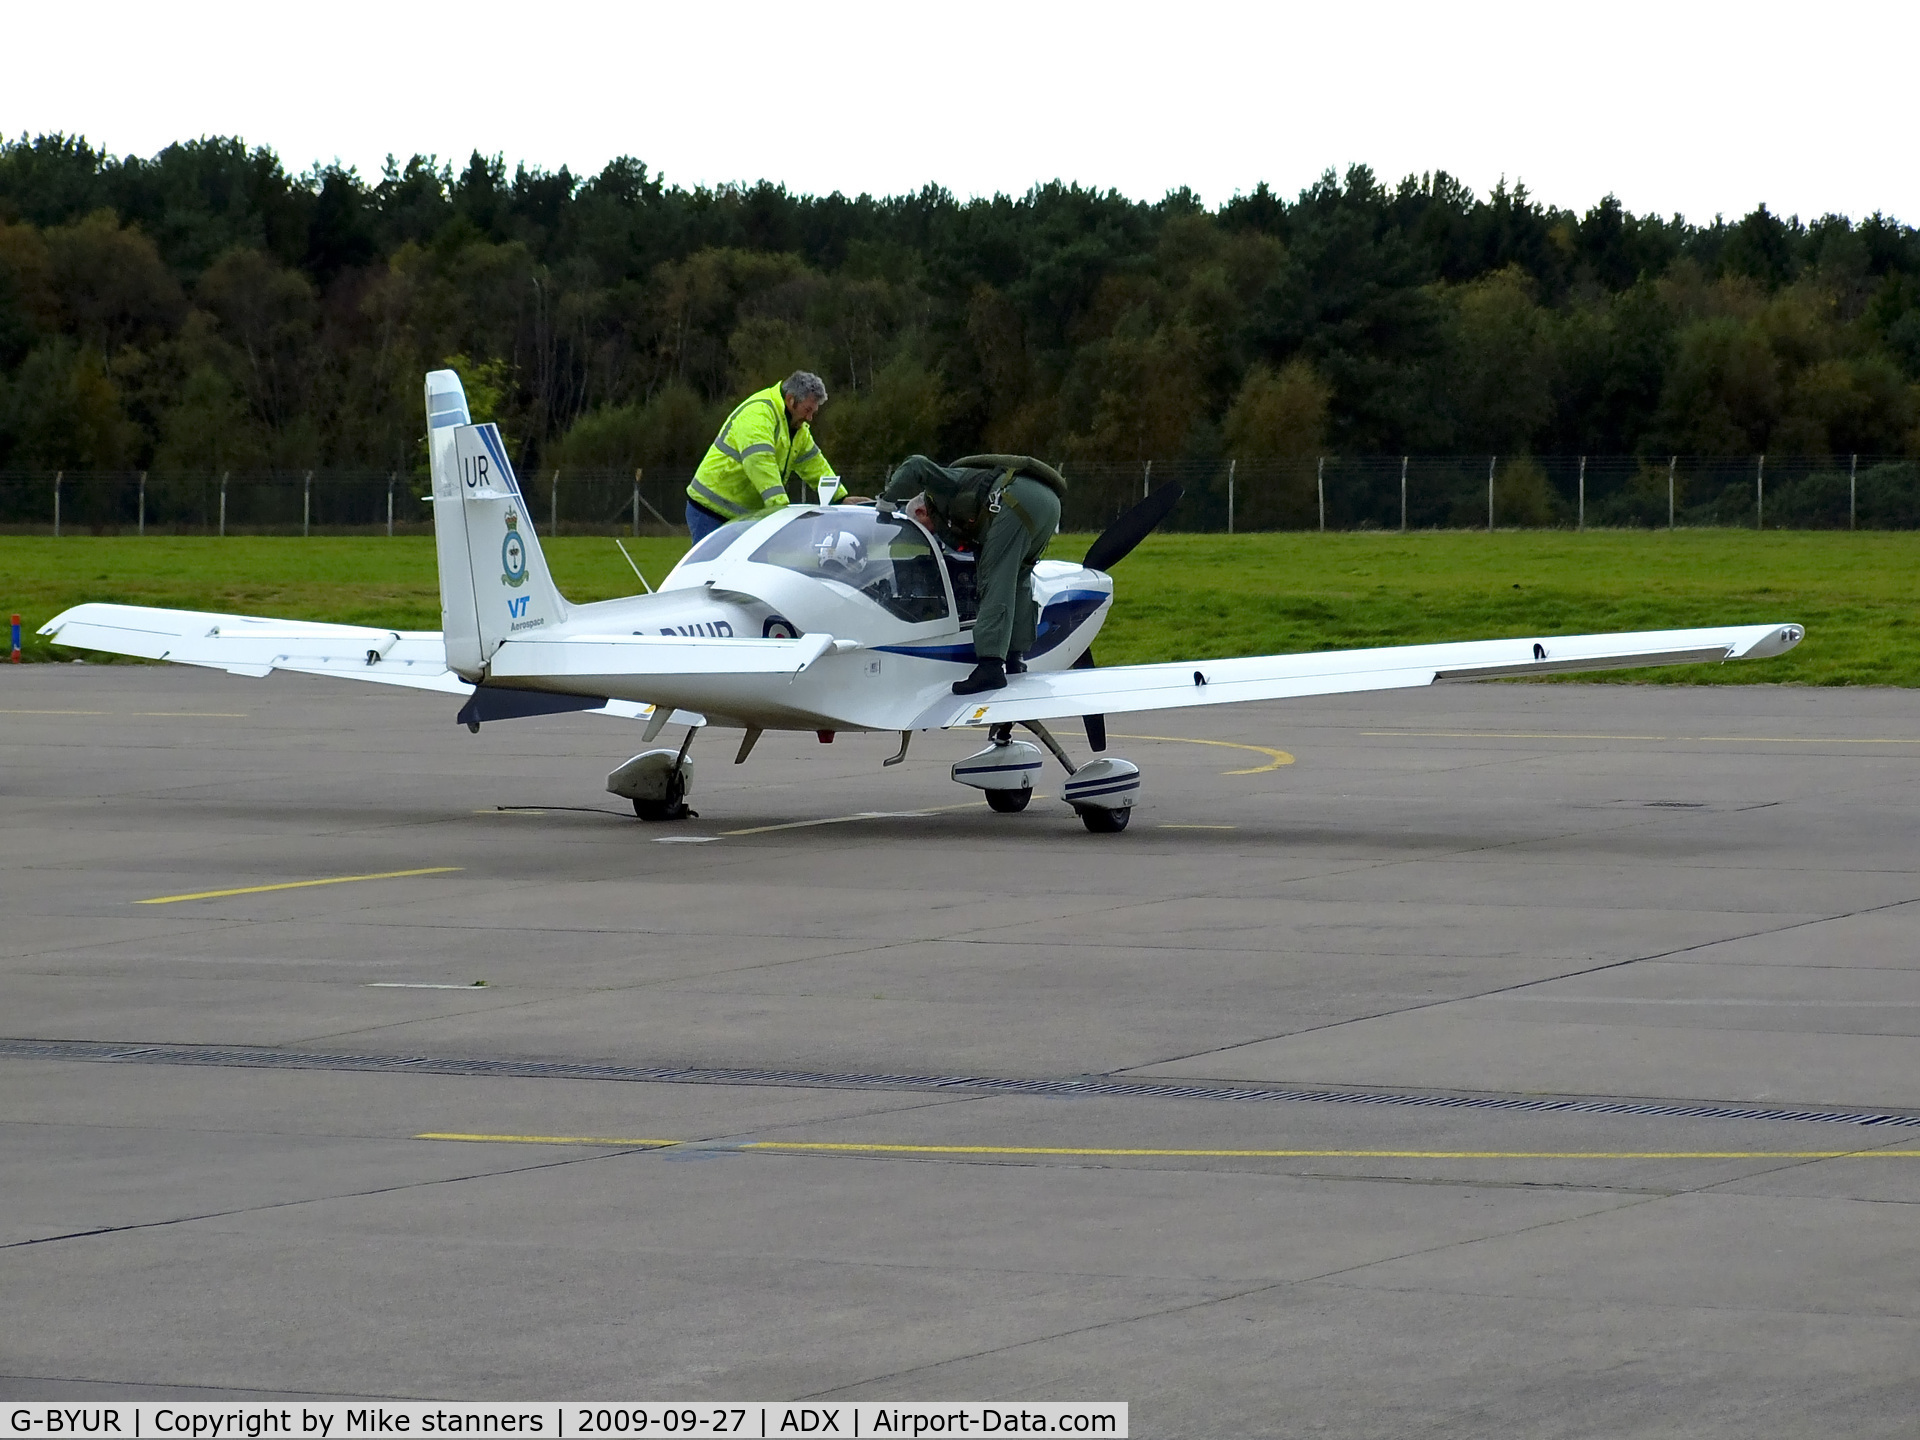 G-BYUR, 1999 Grob G-115E Tutor T1 C/N 82102/E, 1EFTS/12AEF Tutor getting readied for a sortie at its home base